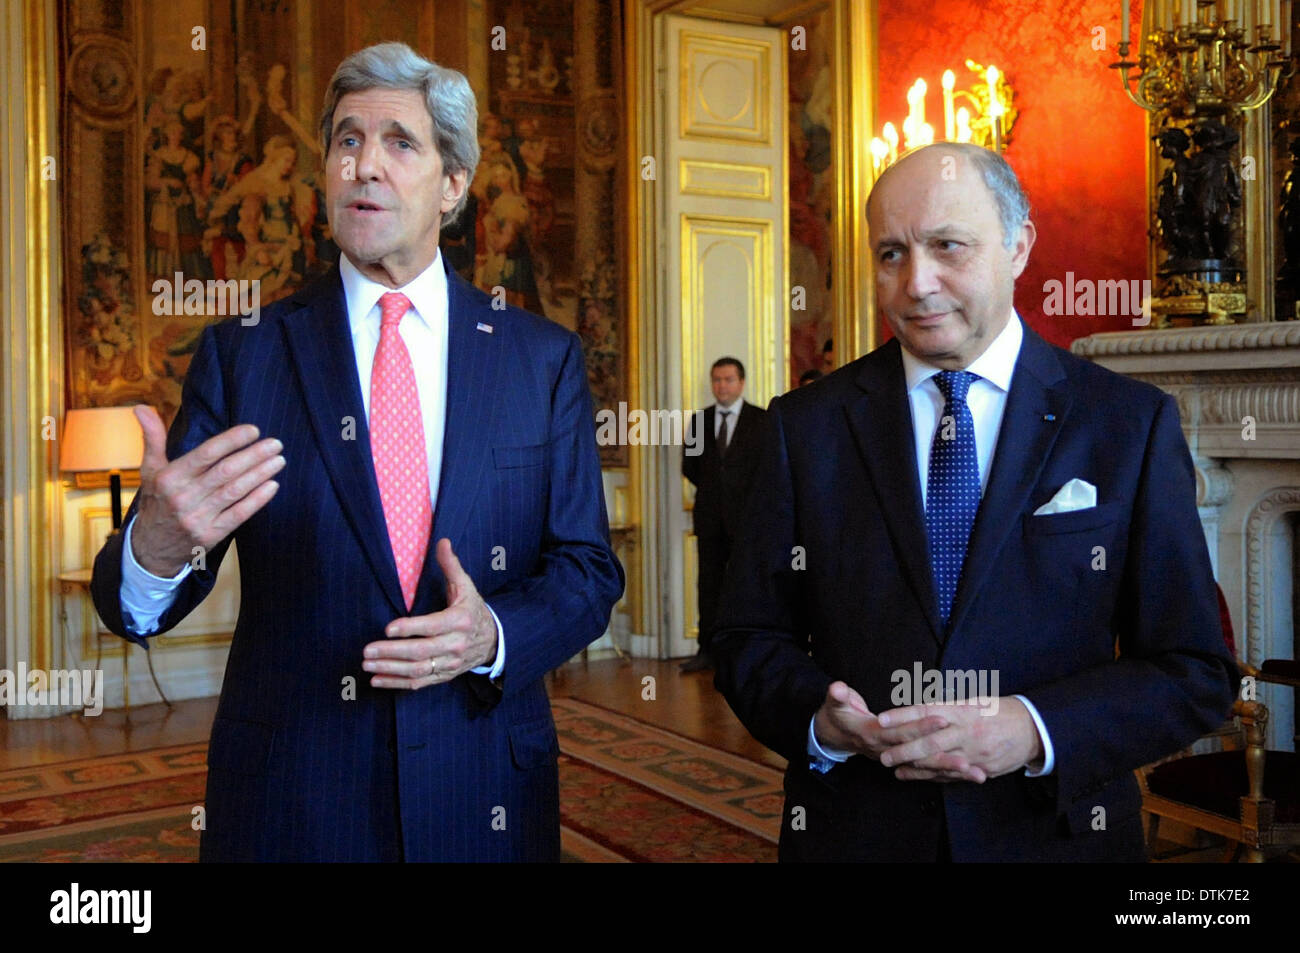 US Secretary of State John Kerry joined by French Foreign Minister Laurent Fabius, speaks to reporters about the situation in Ukraine before a bilateral meeting at the Quai d'Orsay February 19, 2014 in Paris, France. Stock Photo